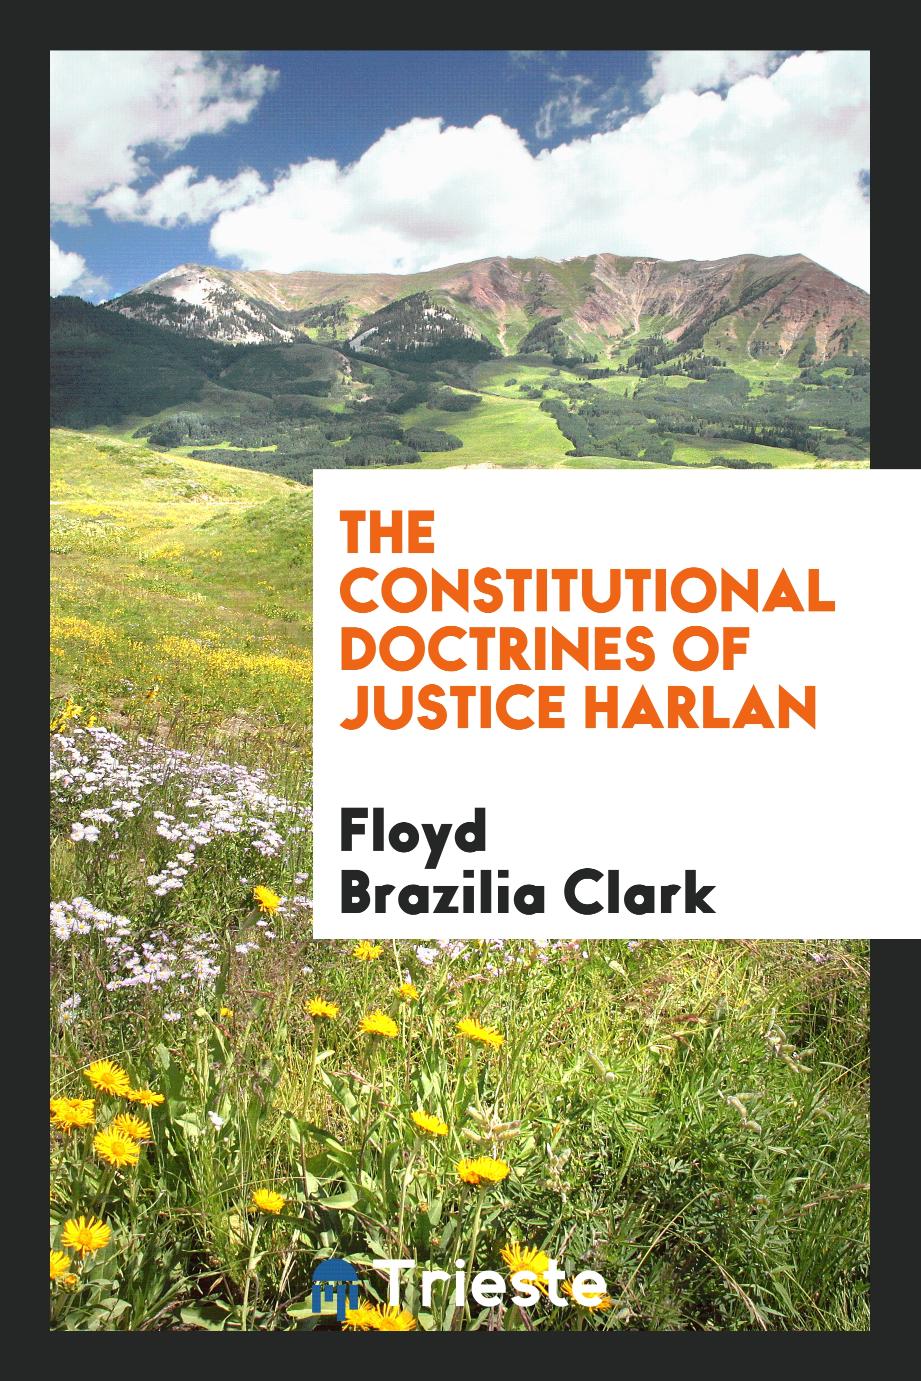 The constitutional doctrines of Justice Harlan